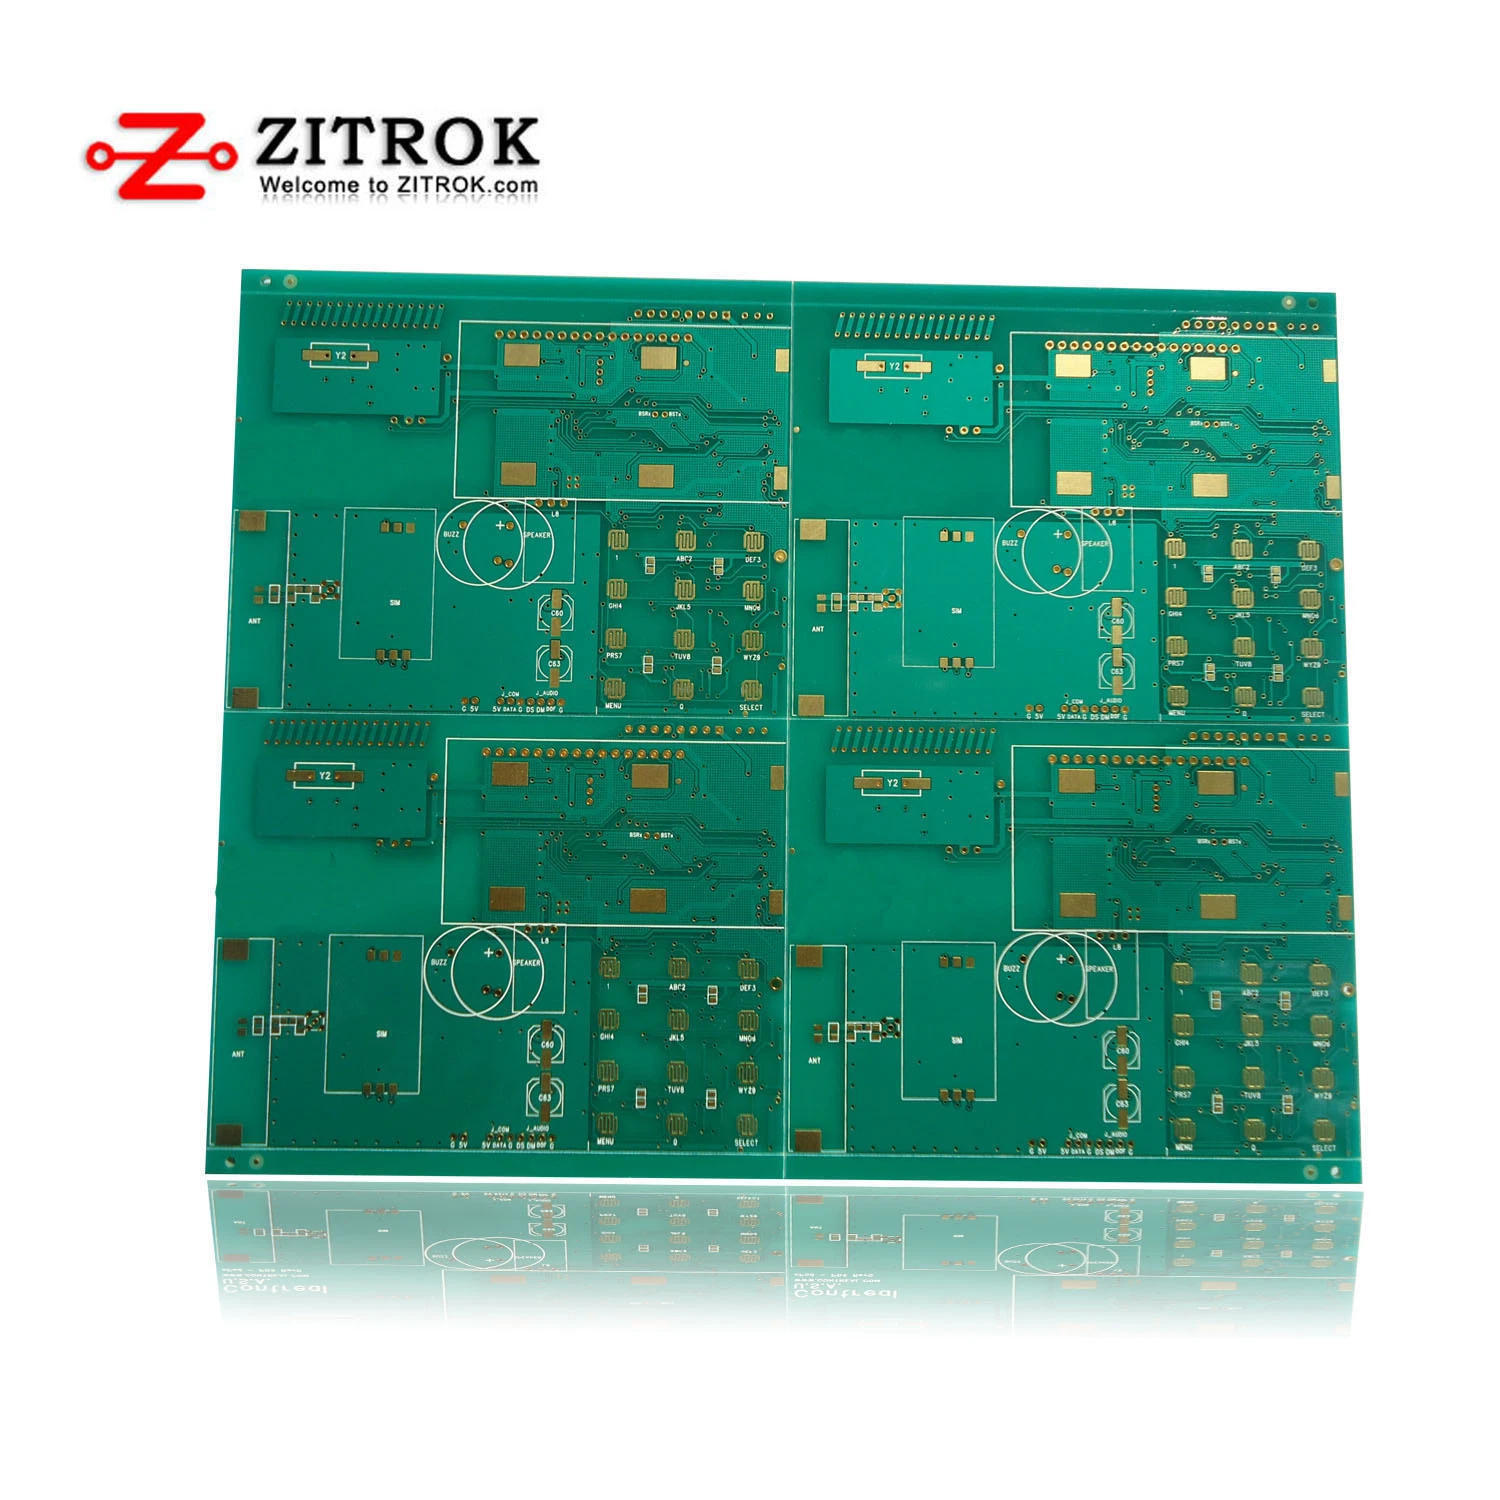 Quick Turn Top Multilayer PCB Laminate, Integrated Circuit PCB, Component Sourcing, SMT